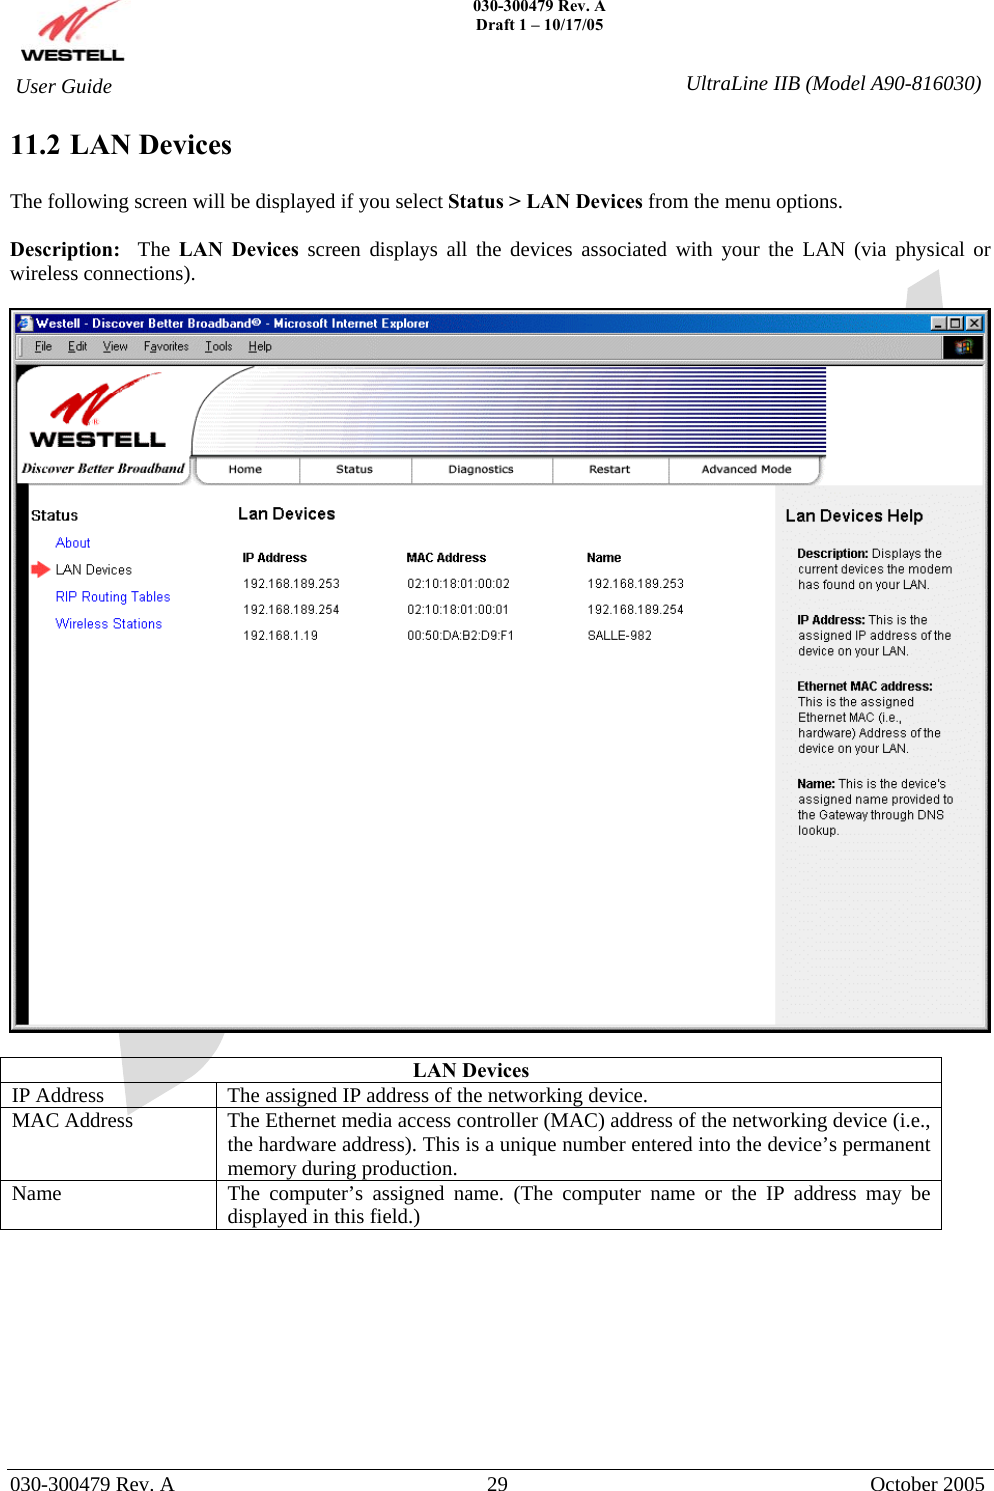    030-300479 Rev. A Draft 1 – 10/17/05   030-300479 Rev. A  29  October 2005  User Guide  UltraLine IIB (Model A90-816030)11.2 LAN Devices  The following screen will be displayed if you select Status &gt; LAN Devices from the menu options.  Description:  The LAN Devices screen displays all the devices associated with your the LAN (via physical or wireless connections).    LAN Devices IP Address  The assigned IP address of the networking device. MAC Address  The Ethernet media access controller (MAC) address of the networking device (i.e., the hardware address). This is a unique number entered into the device’s permanent memory during production.  Name  The computer’s assigned name. (The computer name or the IP address may be displayed in this field.)          